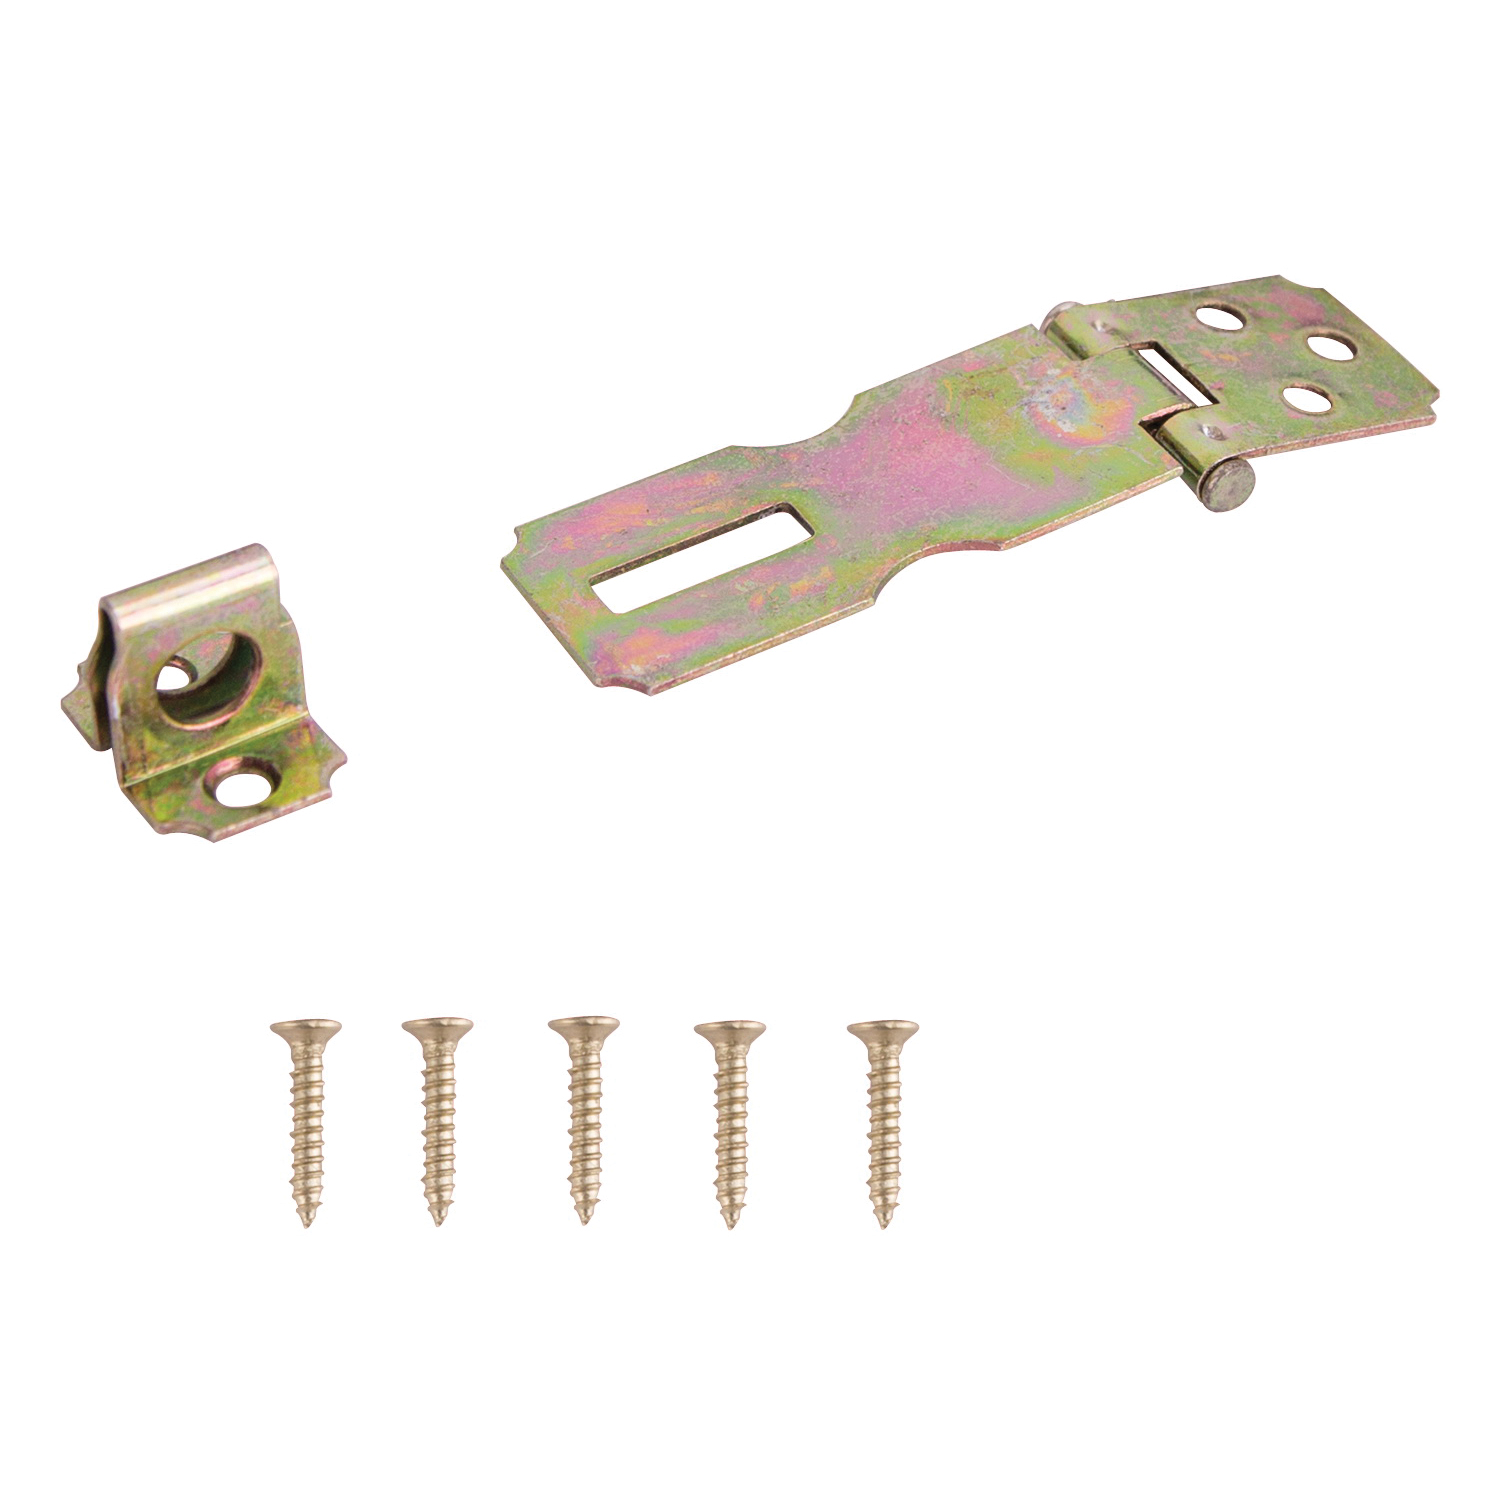 BH-7013L-PS Safety Hasp, 2-1/2 in L, 2-1/2 in W, Steel, Satin Brass, 9/32 Dia Shackle, Fixed Staple